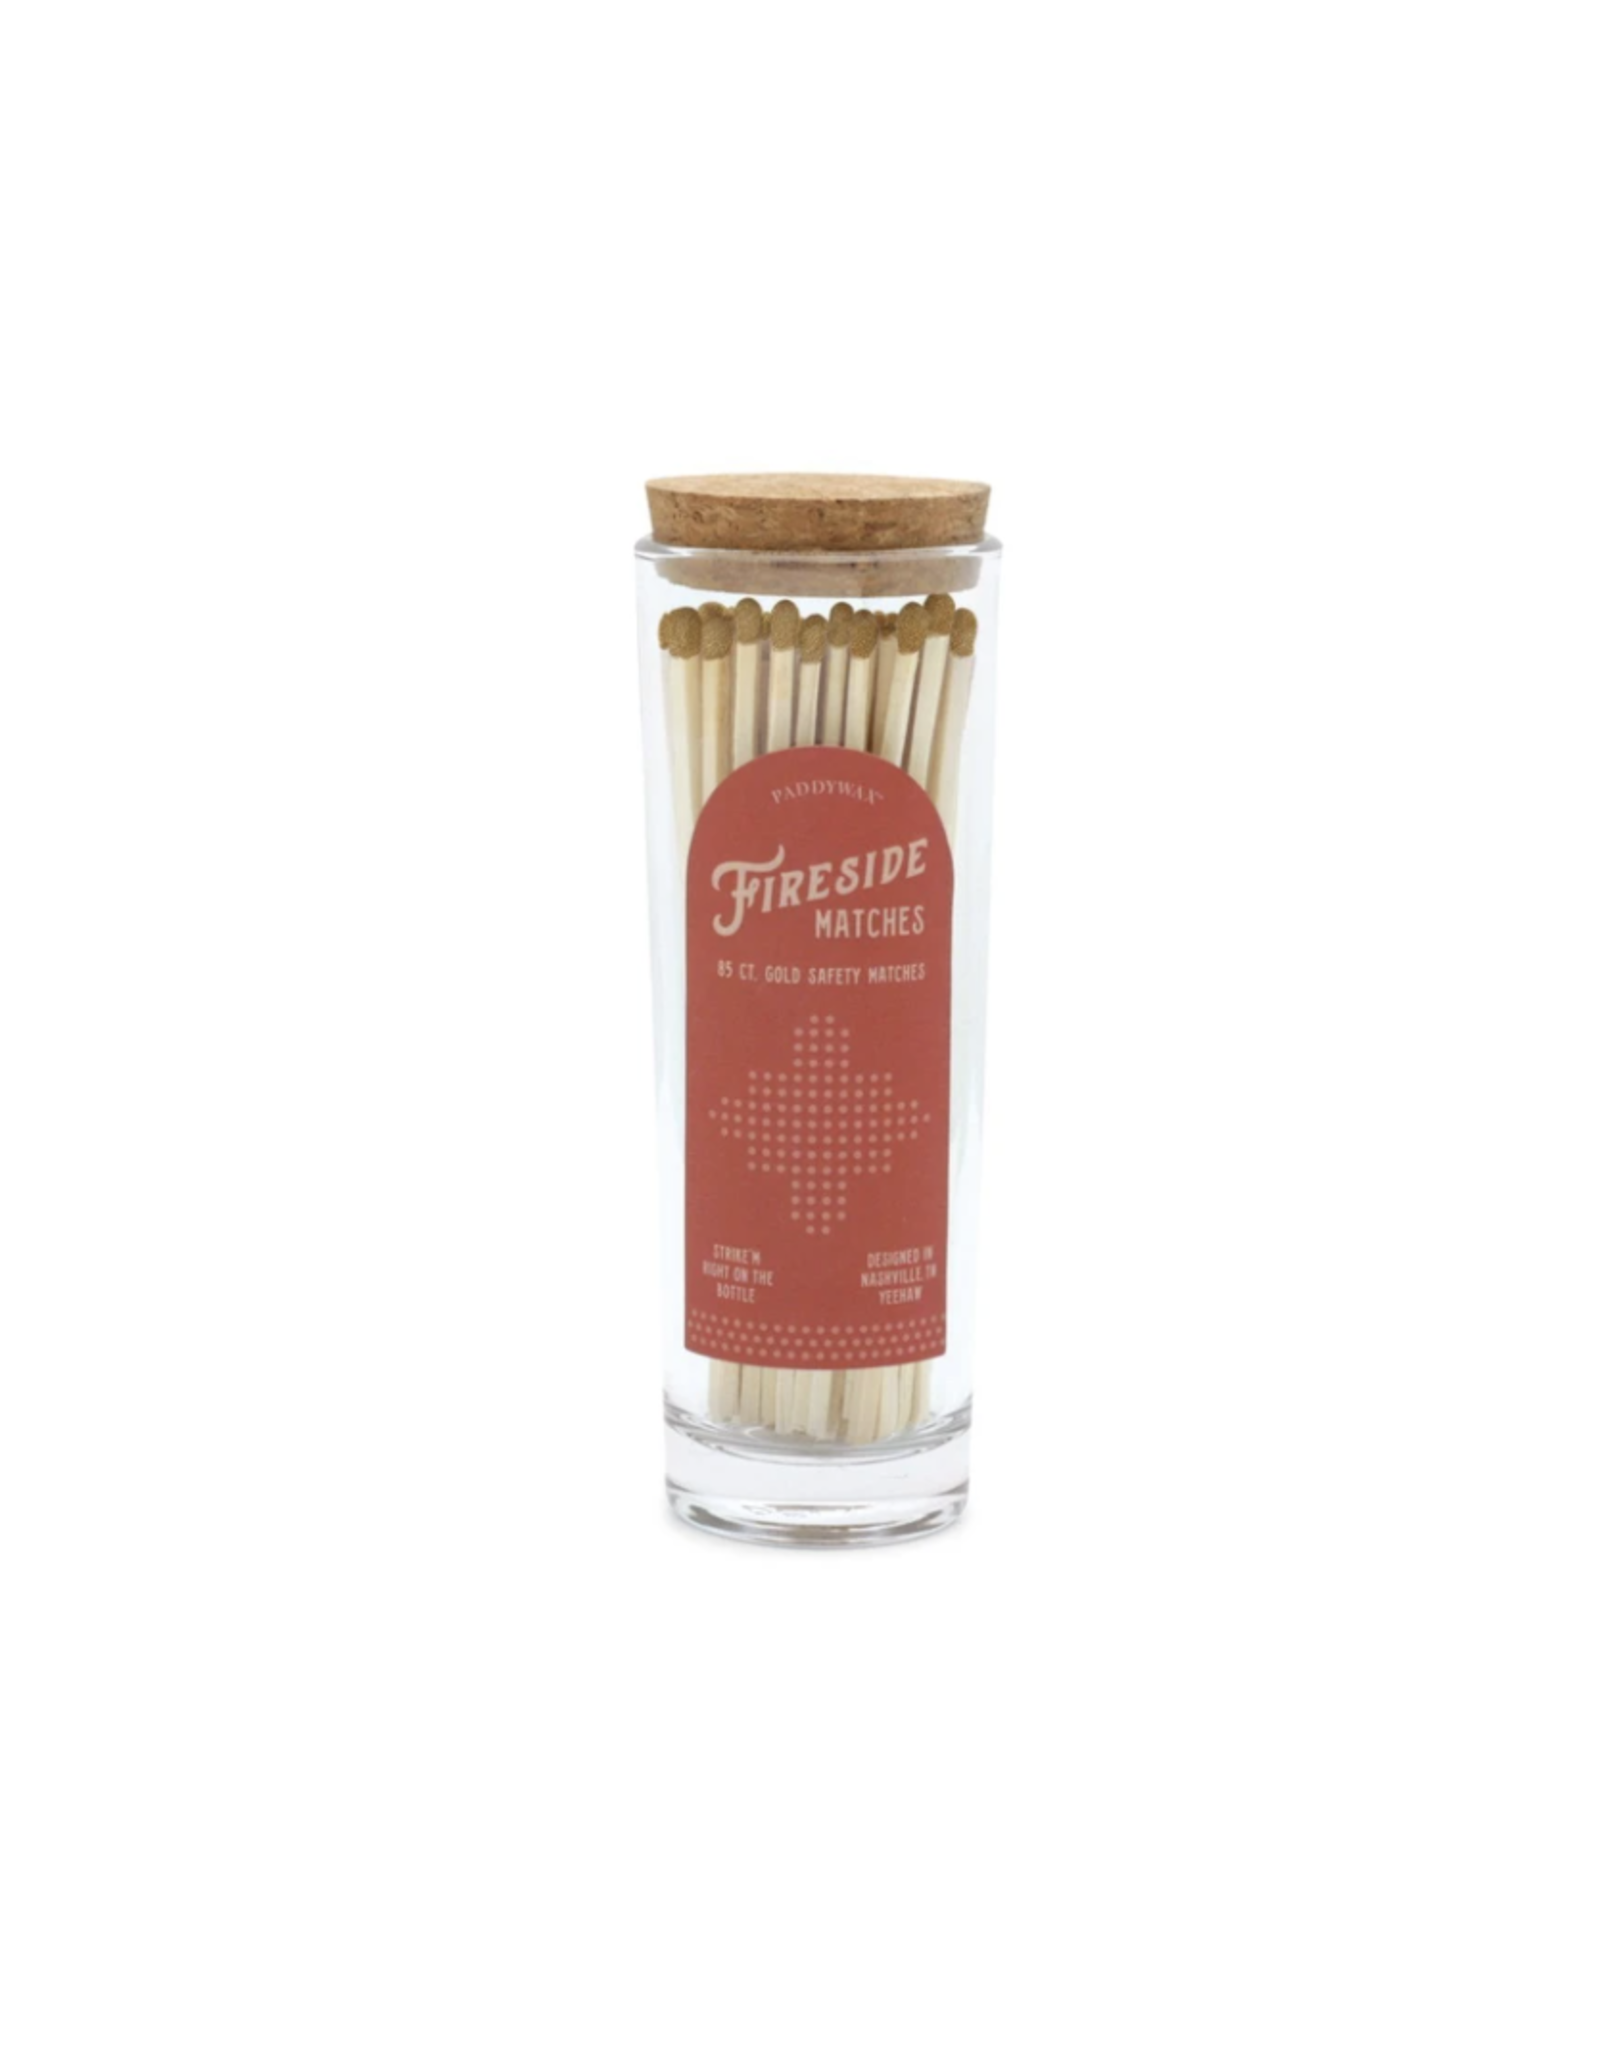 Matches in Glass Jar - Gold